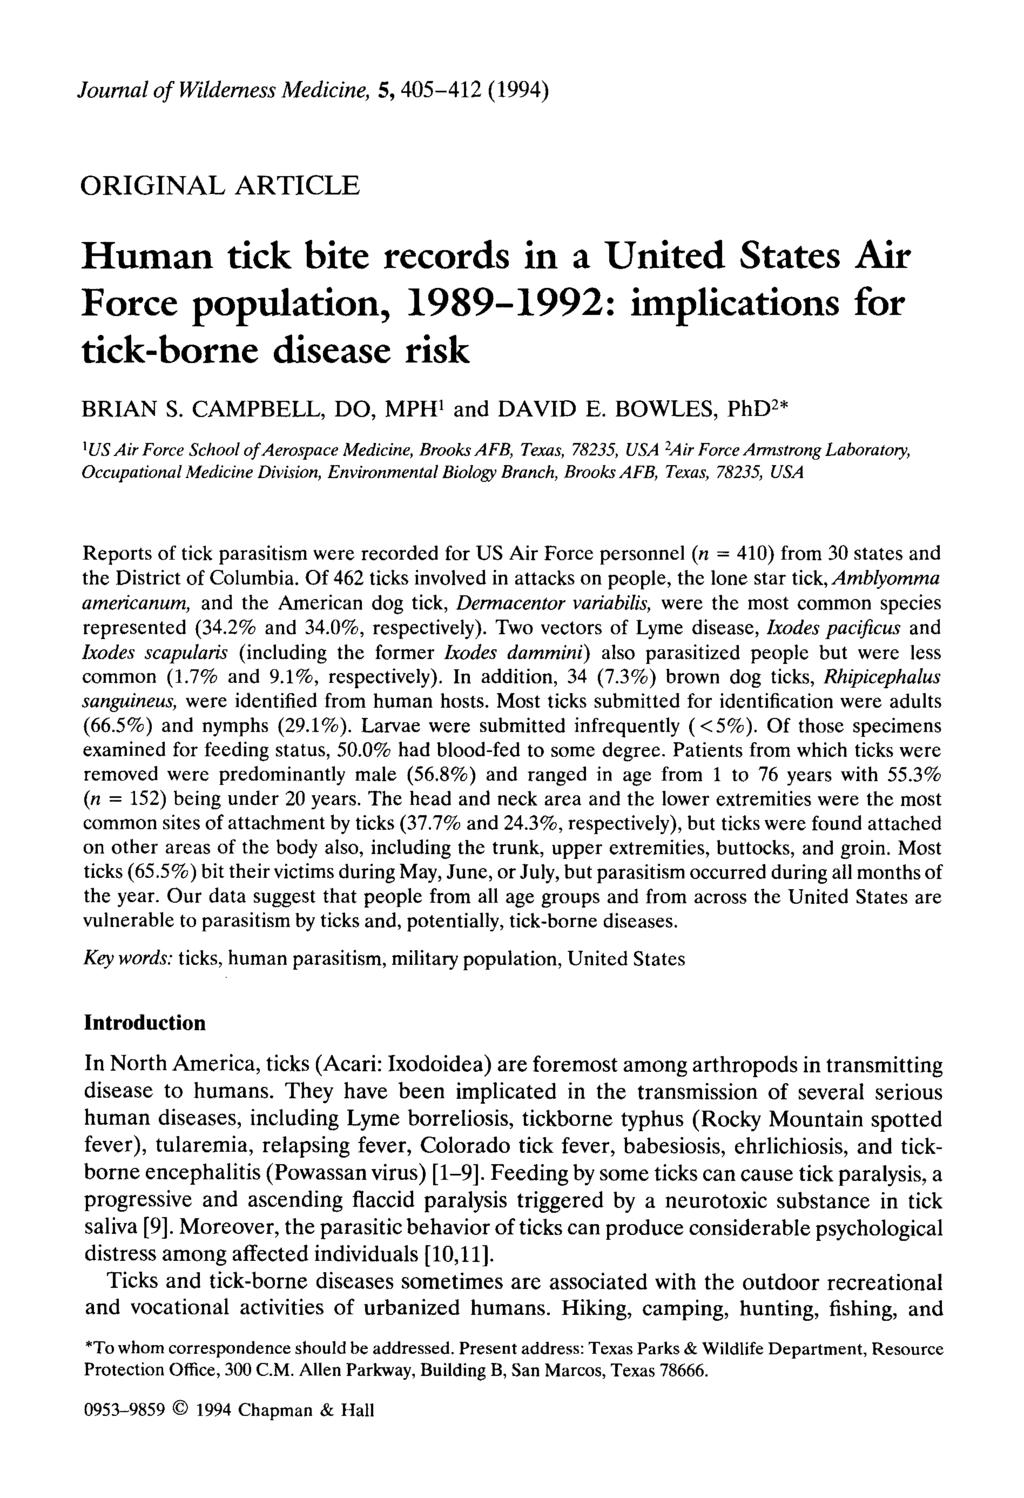 Journal of Wilderness Medicine, 5,405-412 (1994) ORIGINAL ARTICLE Human tick bite records in a United States Air Force population, 1989-1992: implications for tick-borne disease risk BRIAN S.